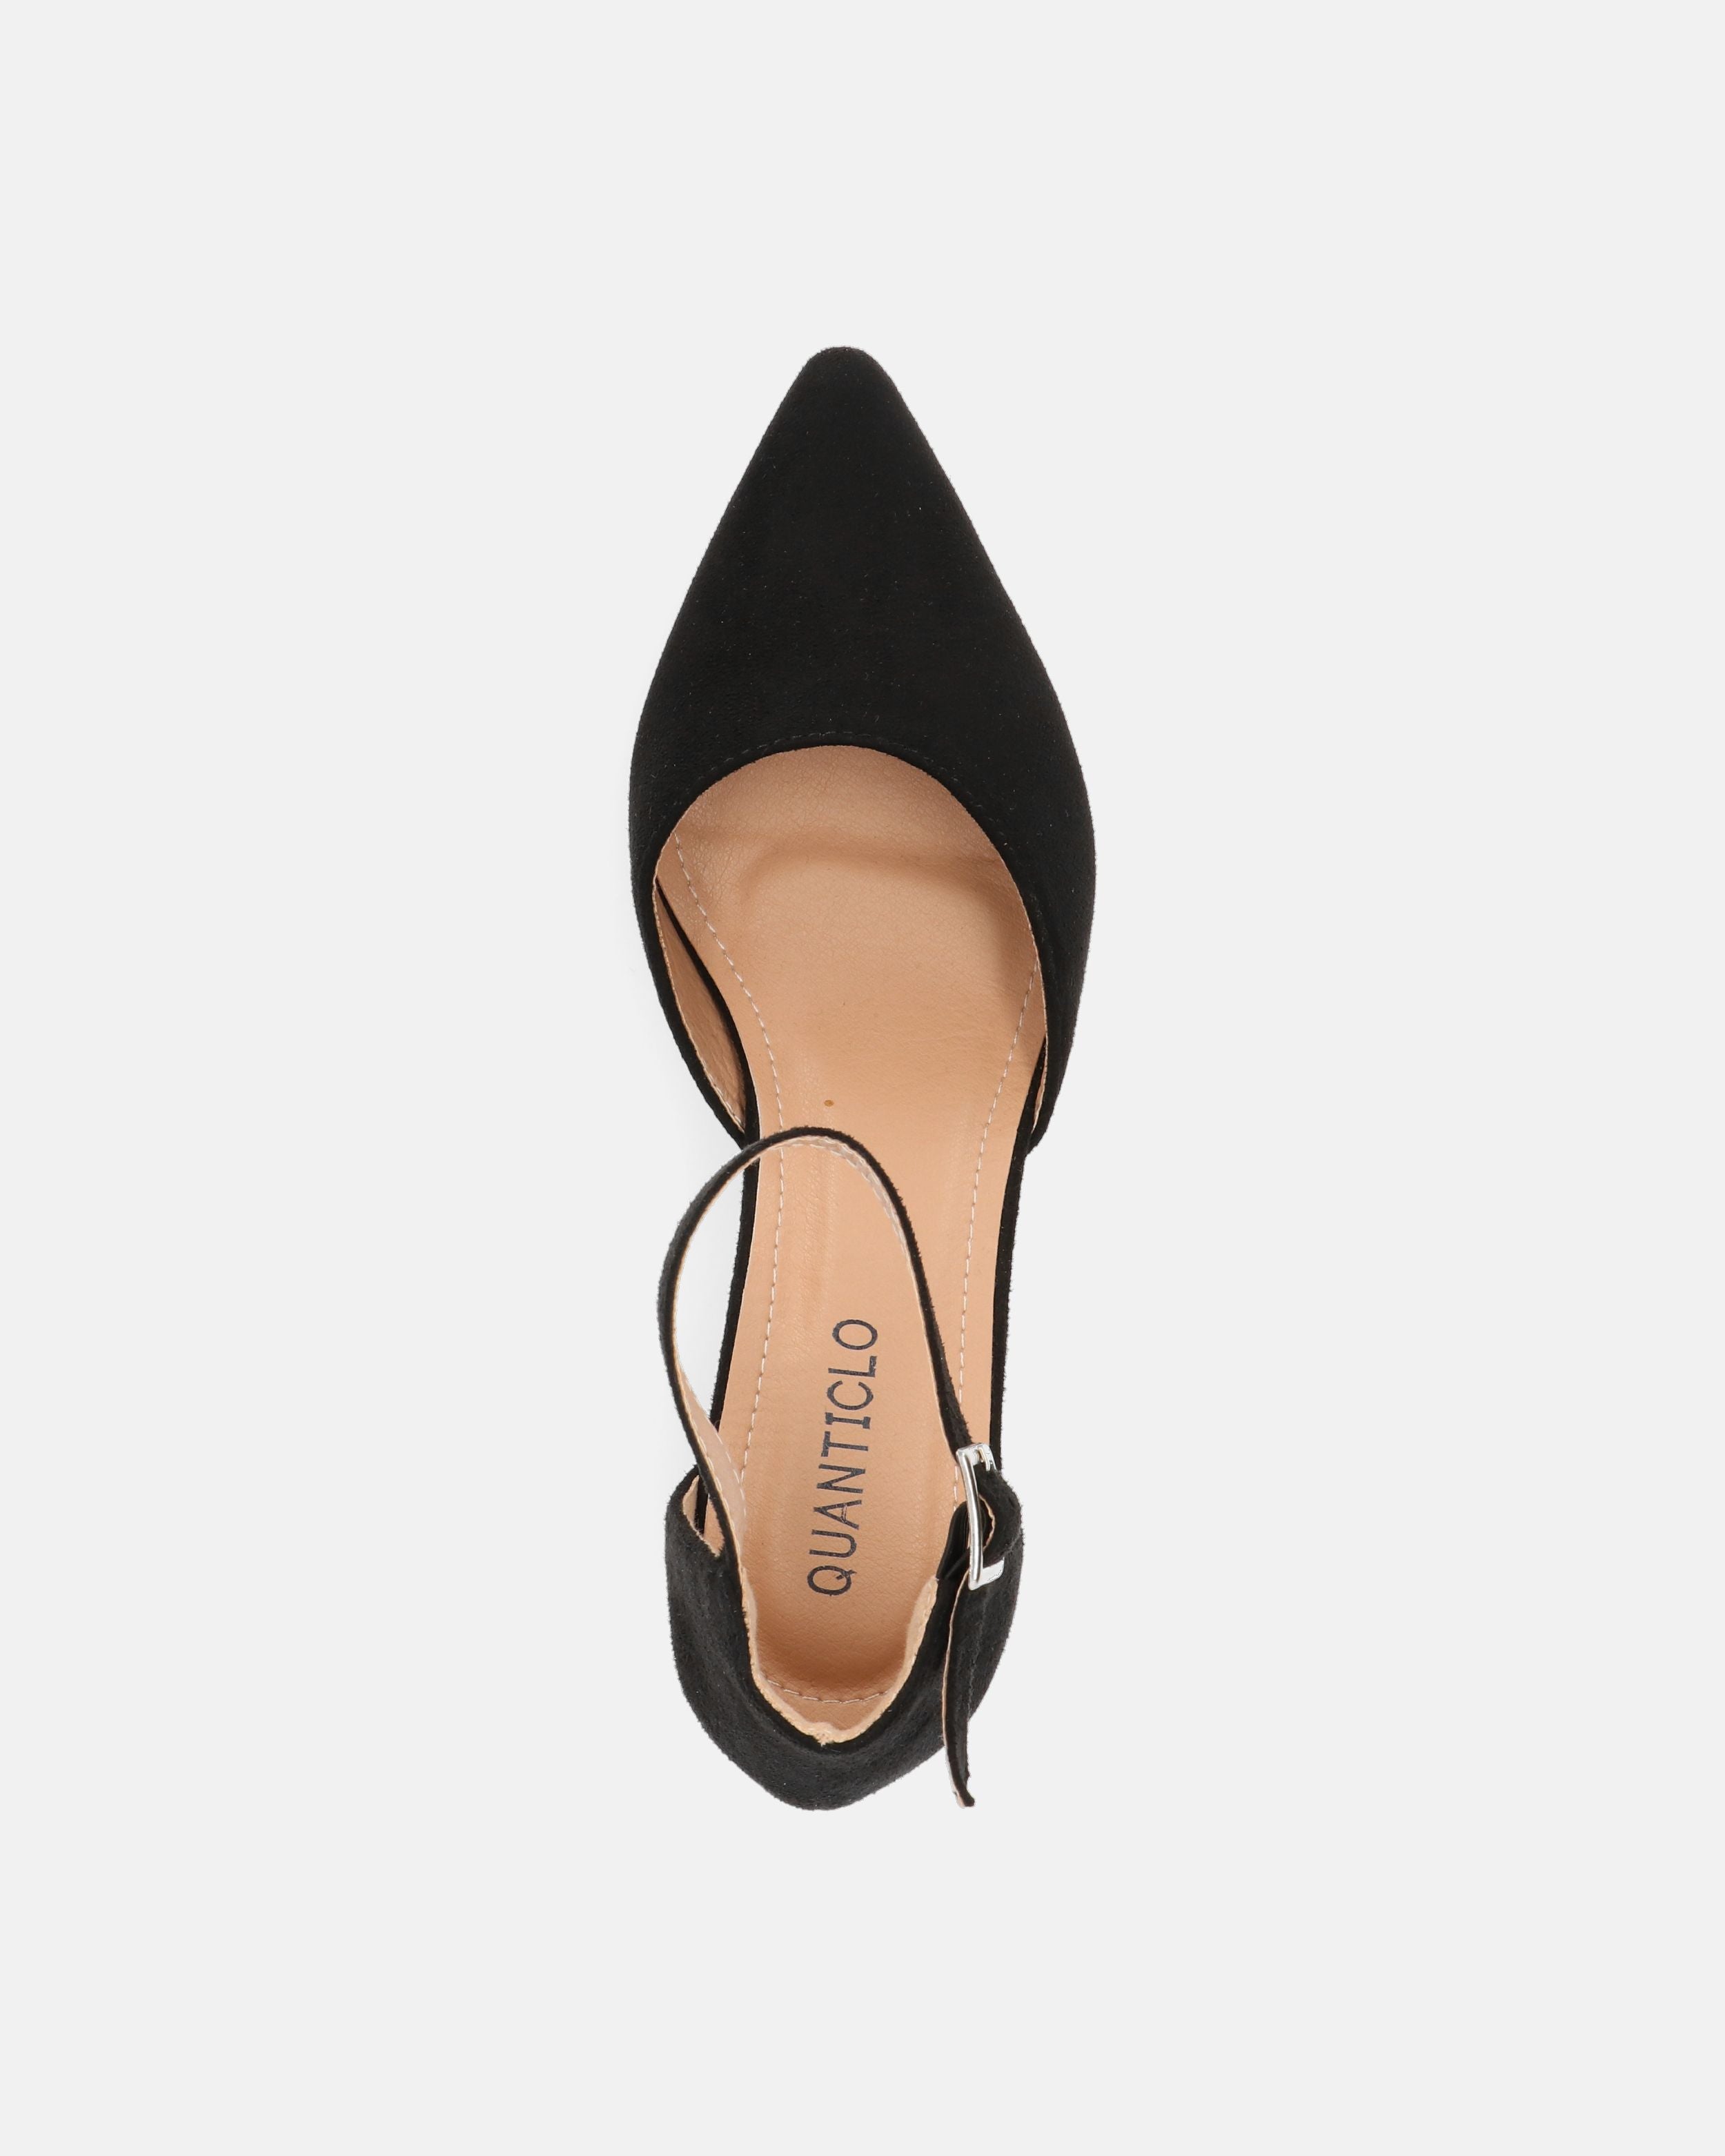 GINNY - mid heeled shoes